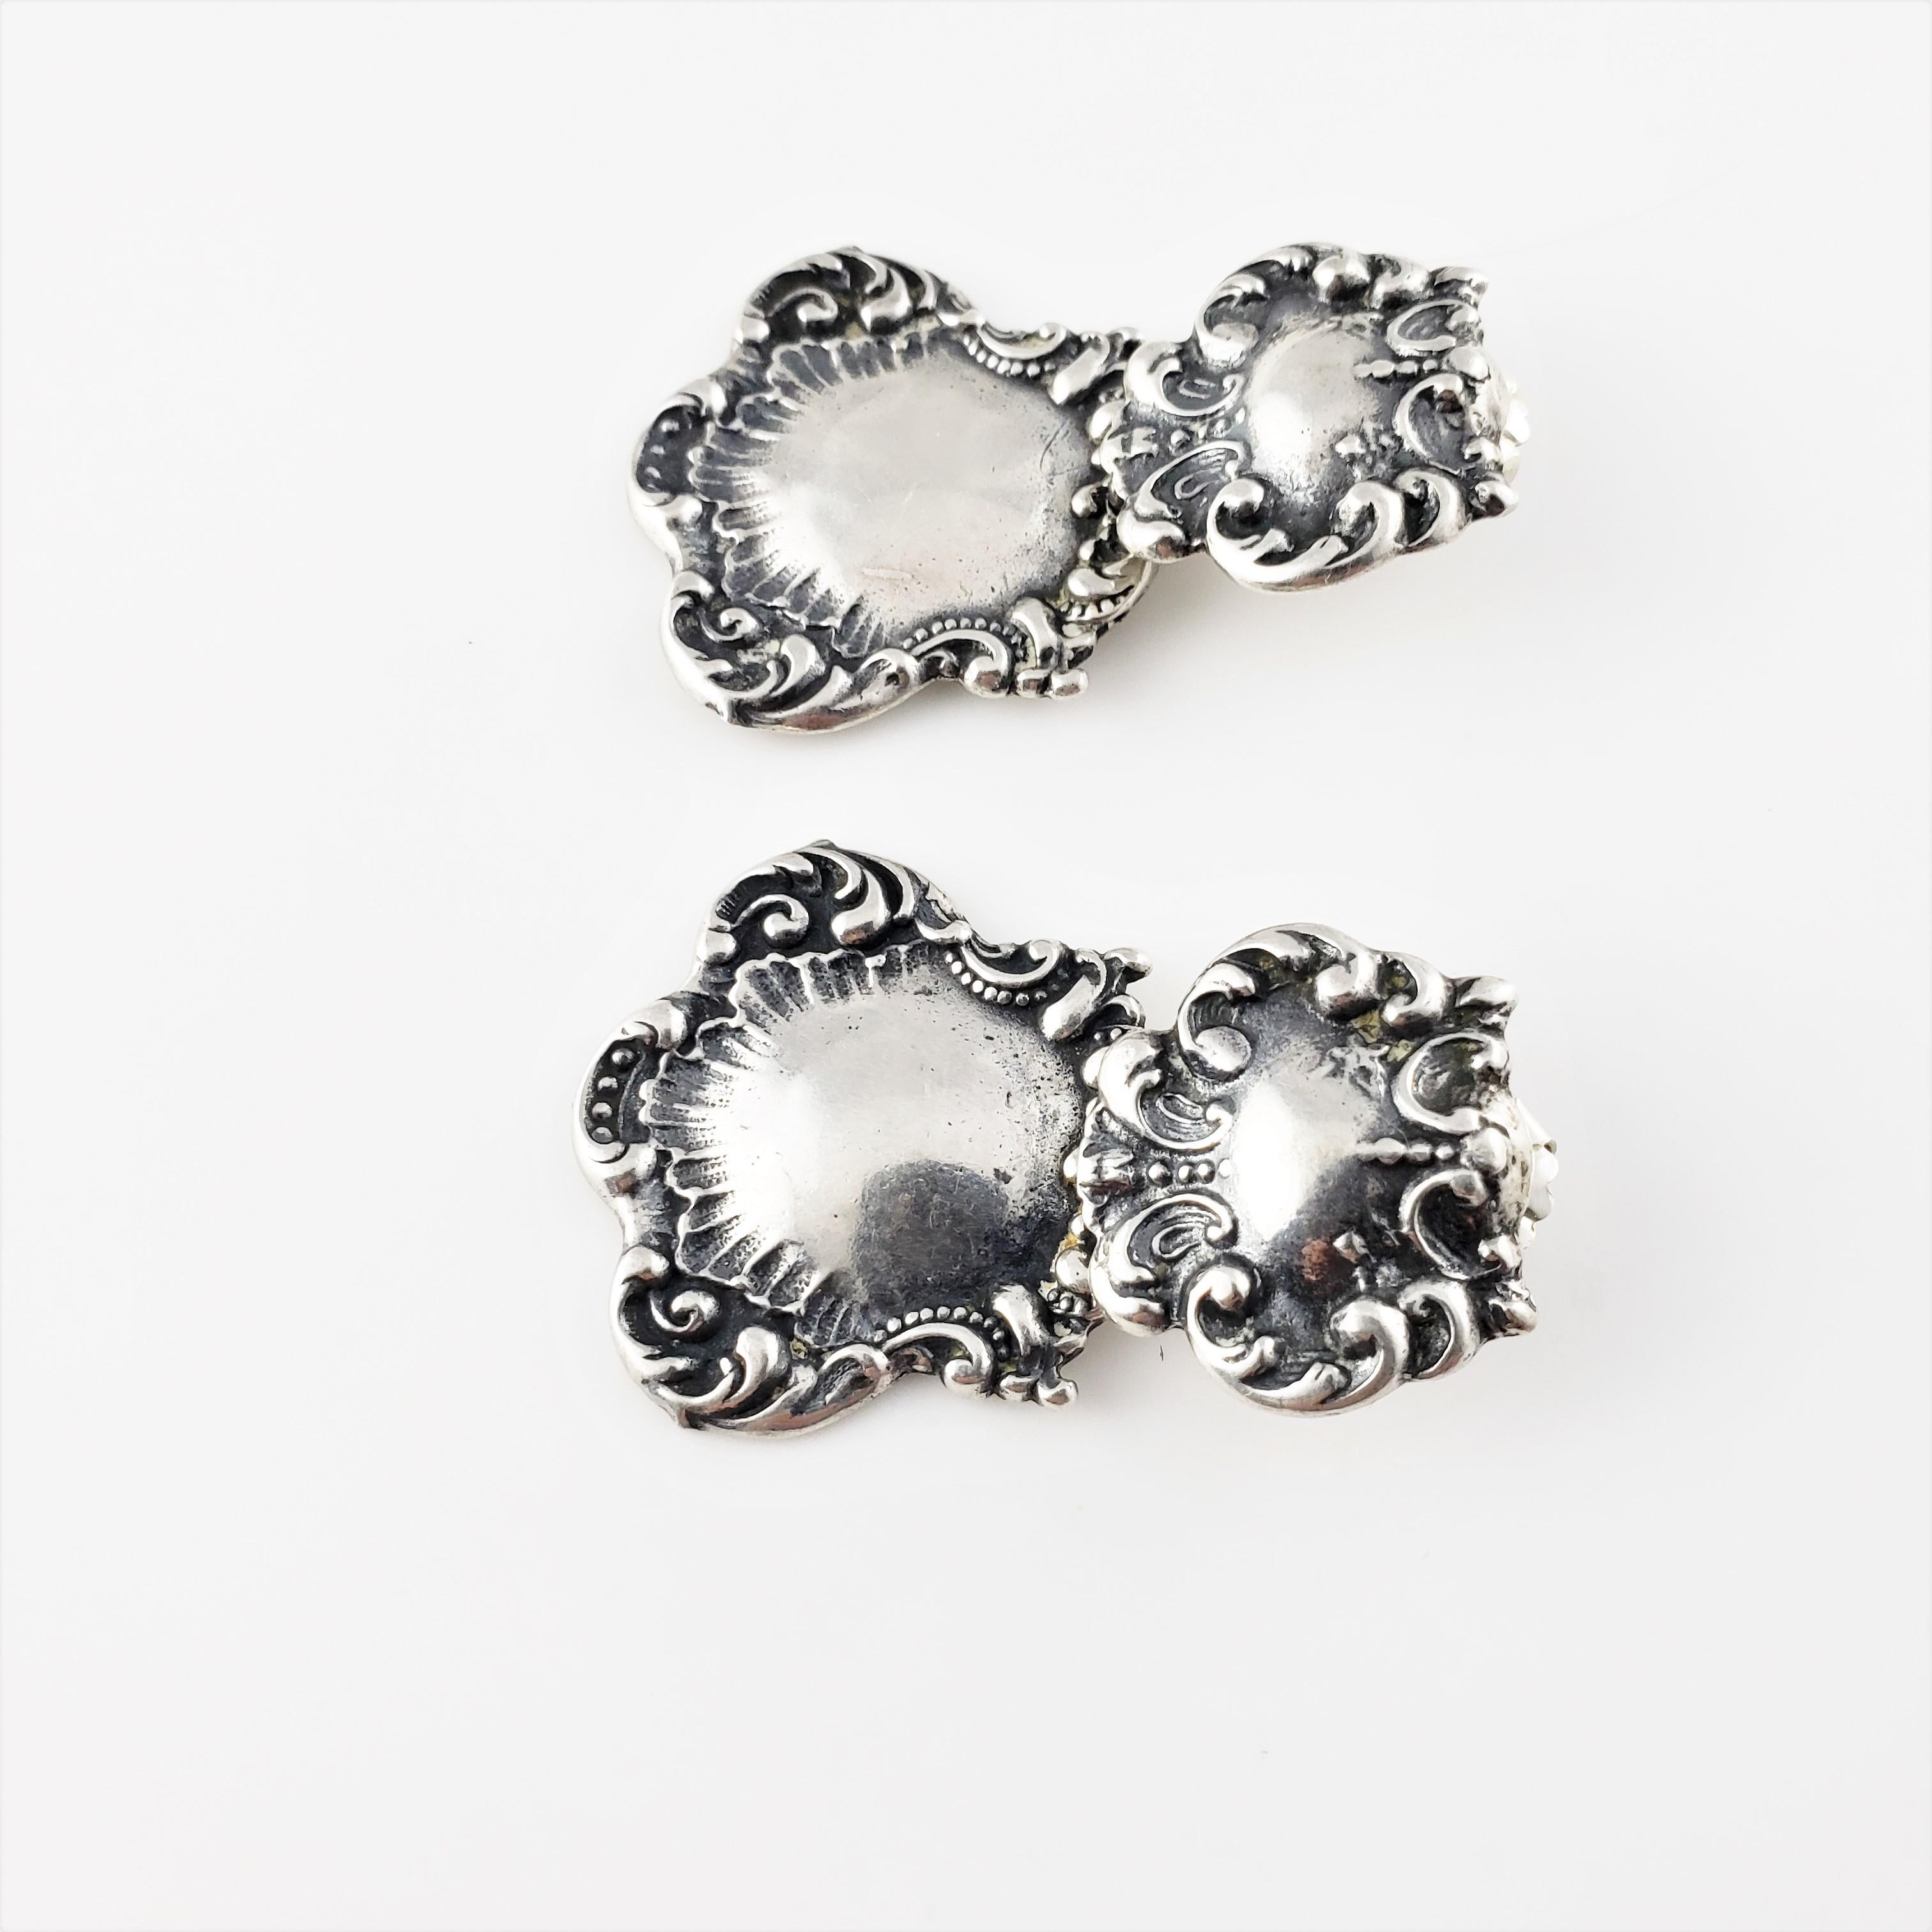 Vintage T. Foree Sterling Silver Luggage Tag Repousse Earrings-

These lovely repousse earrings are beautifully crafted in elegant sterling silver. Push back closures.

This pair of earrings is made from reproduction casting of Victorian luggage